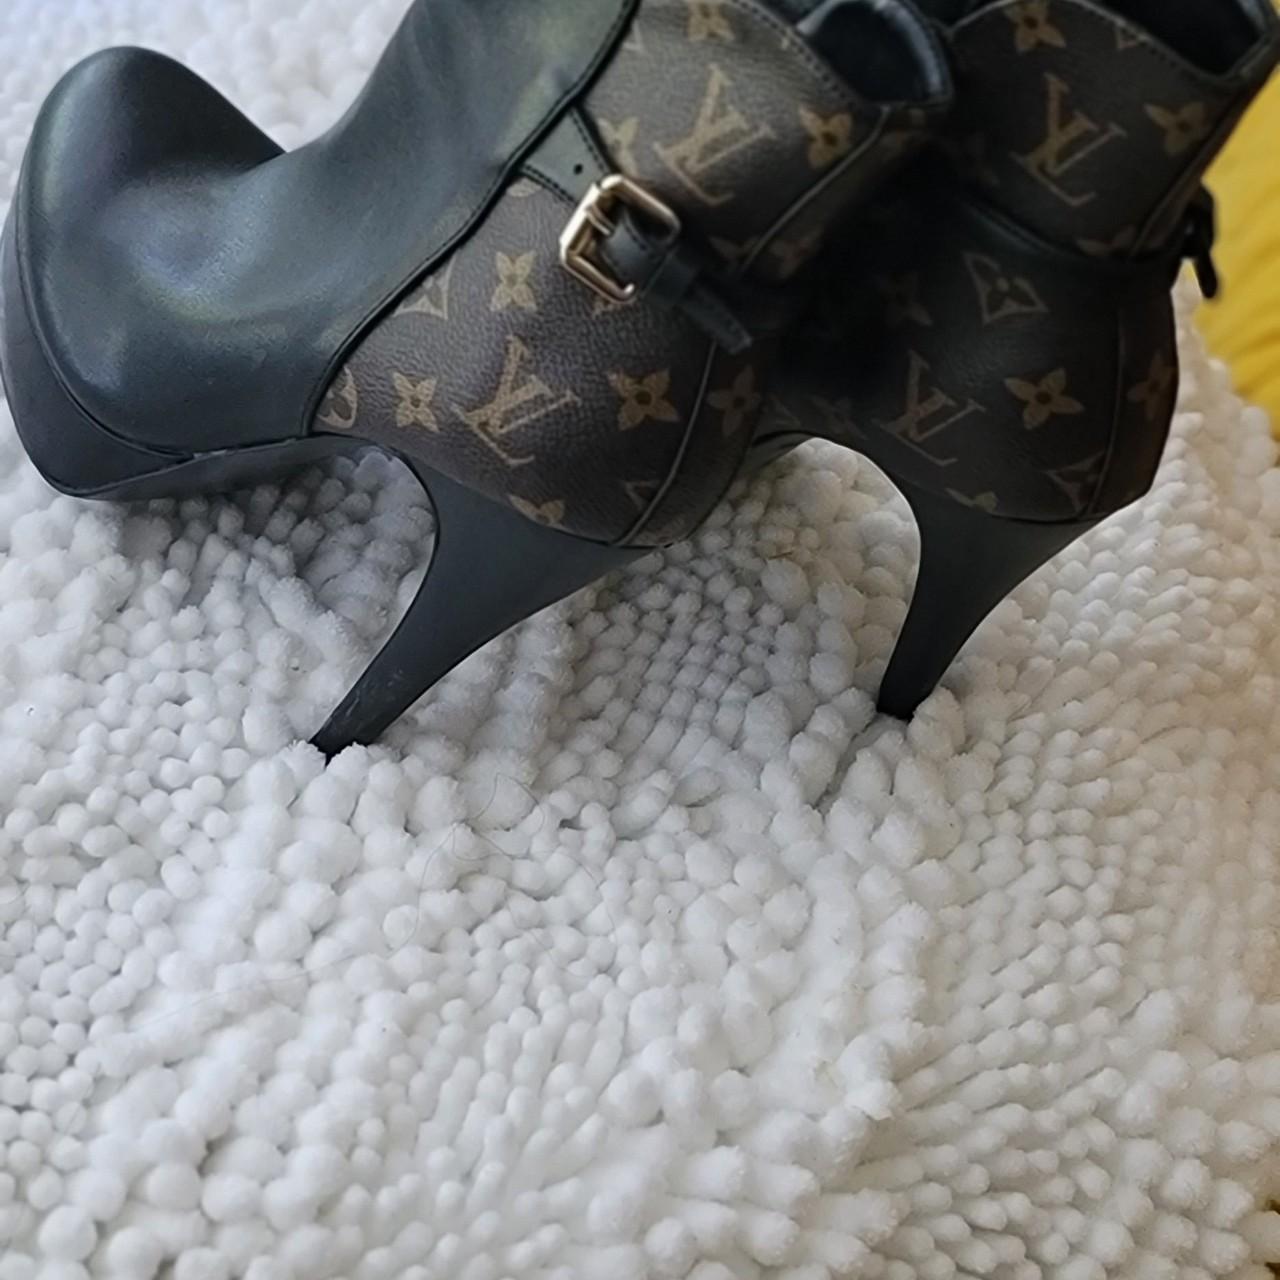 Louis Vuitton Afterglow Ankle Boot